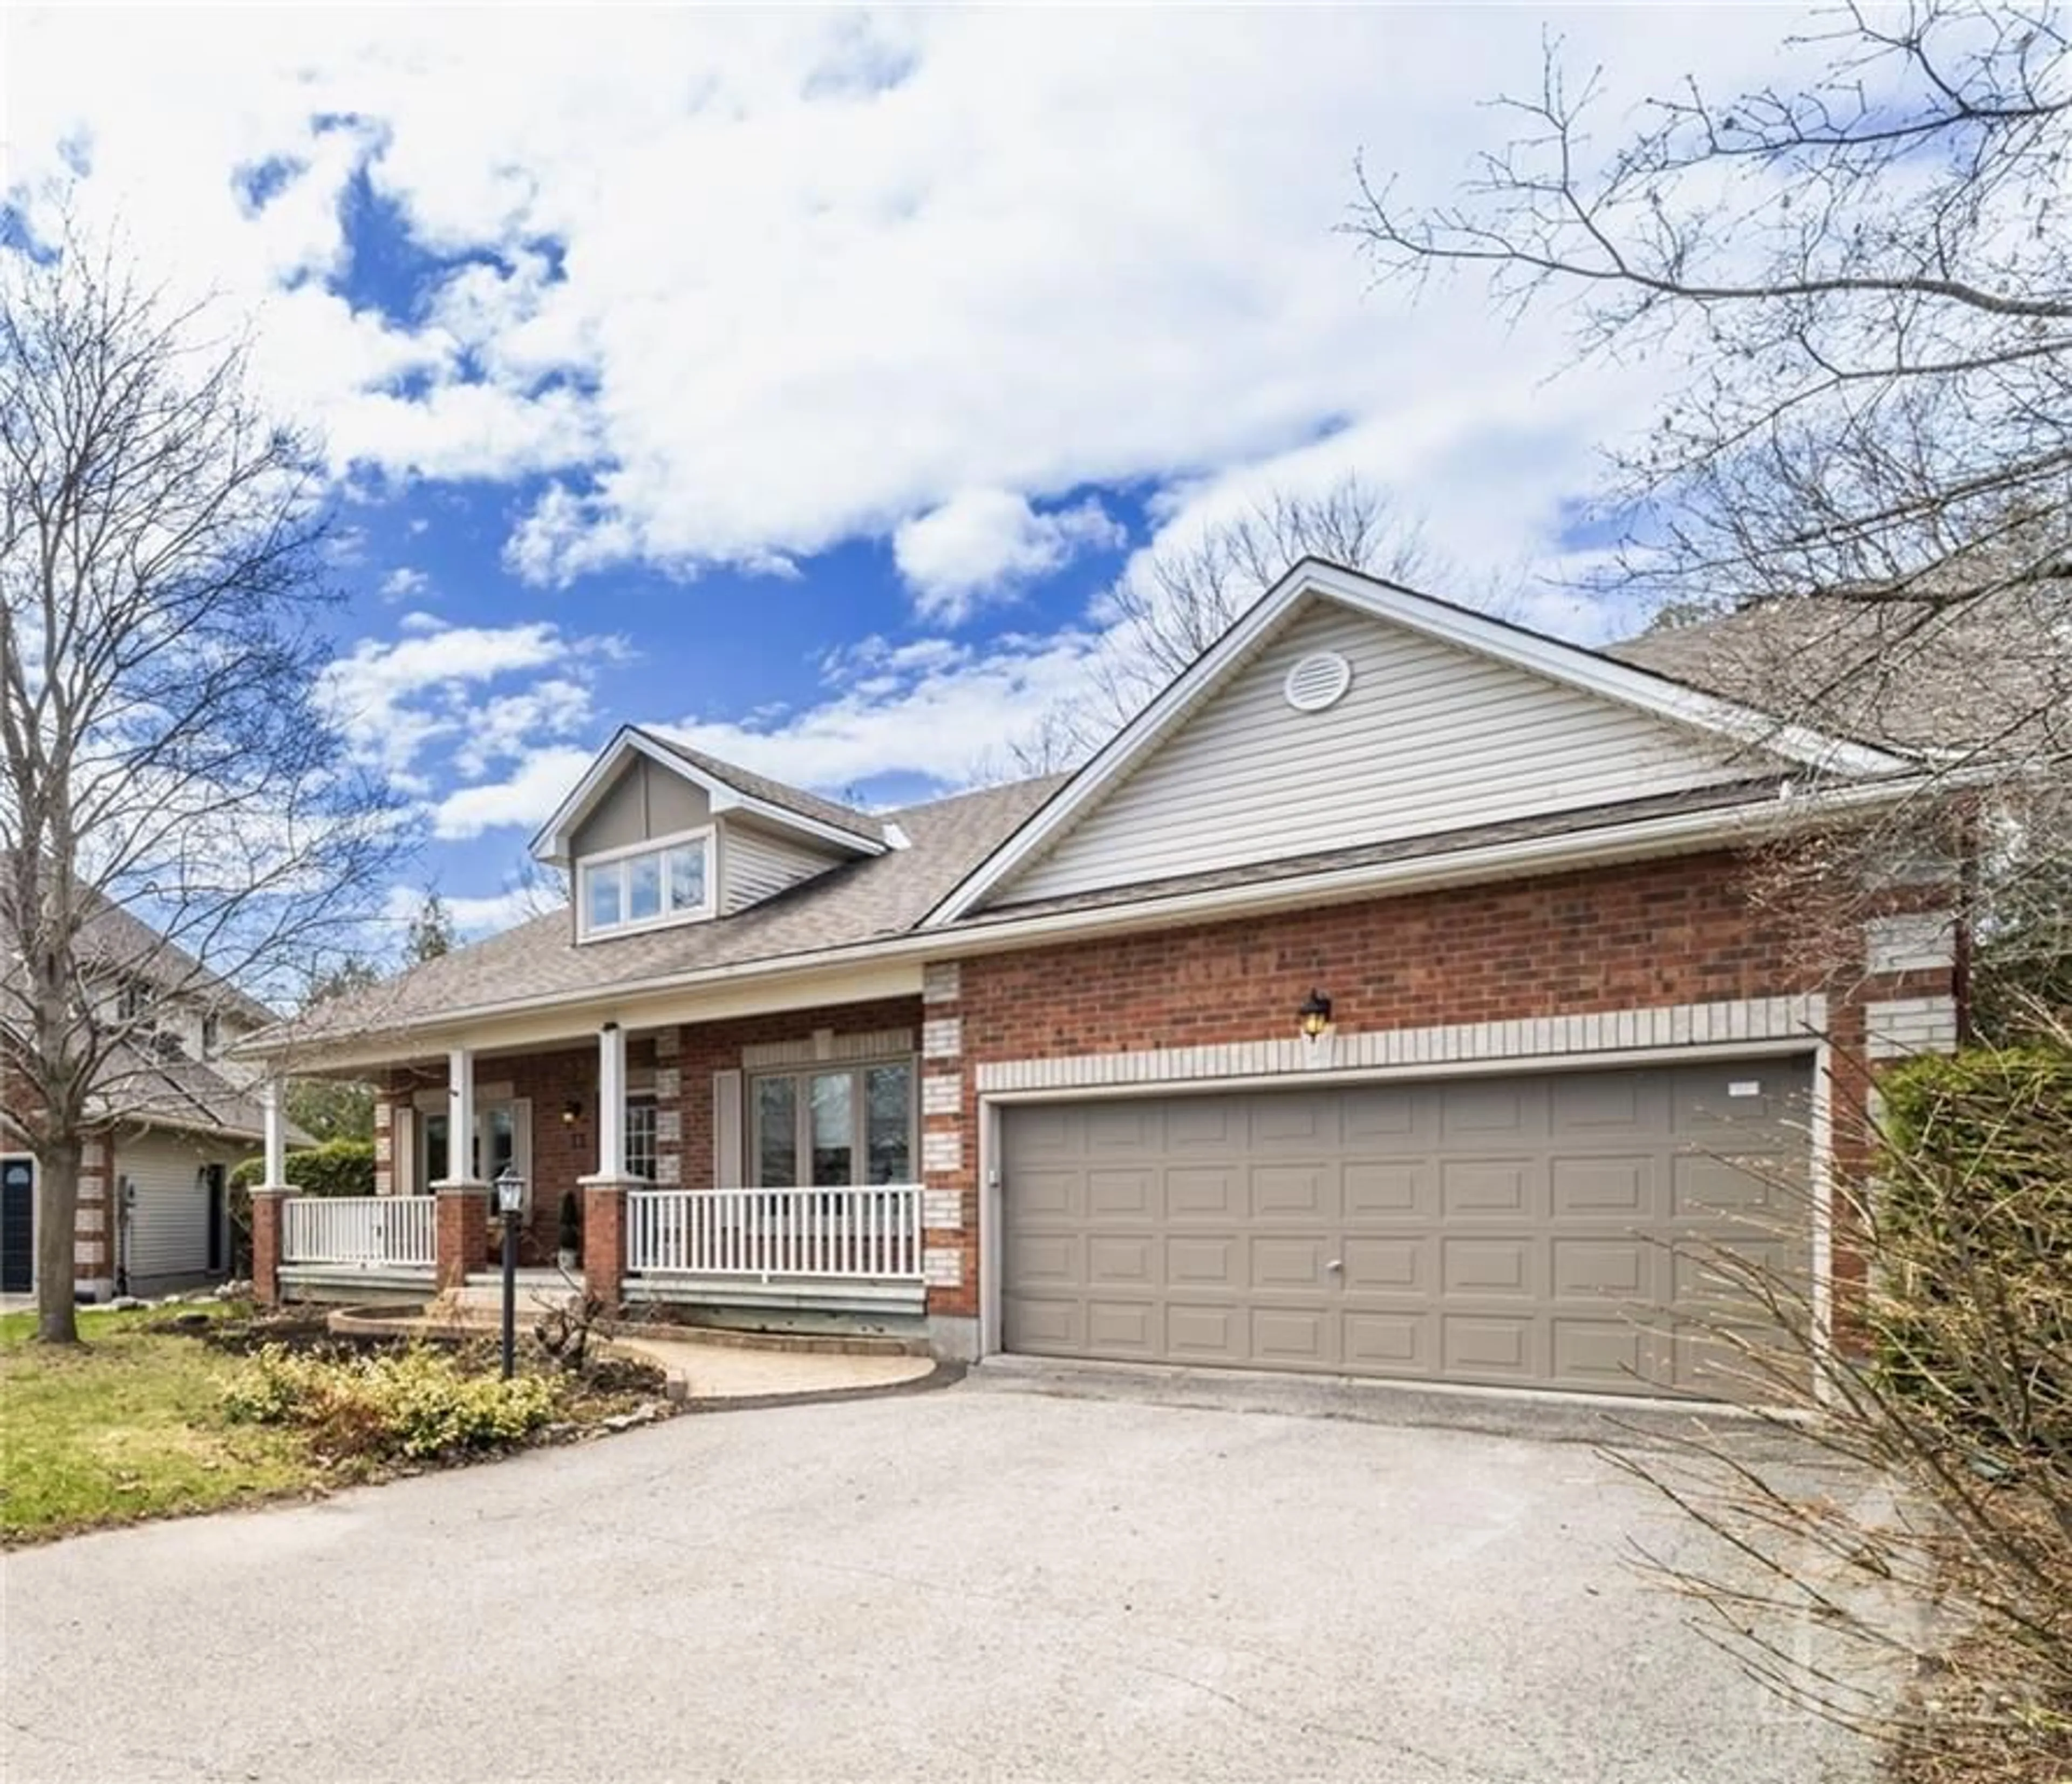 Home with brick exterior material for 13 FOREST CREEK Dr, Ottawa Ontario K2S 1L6